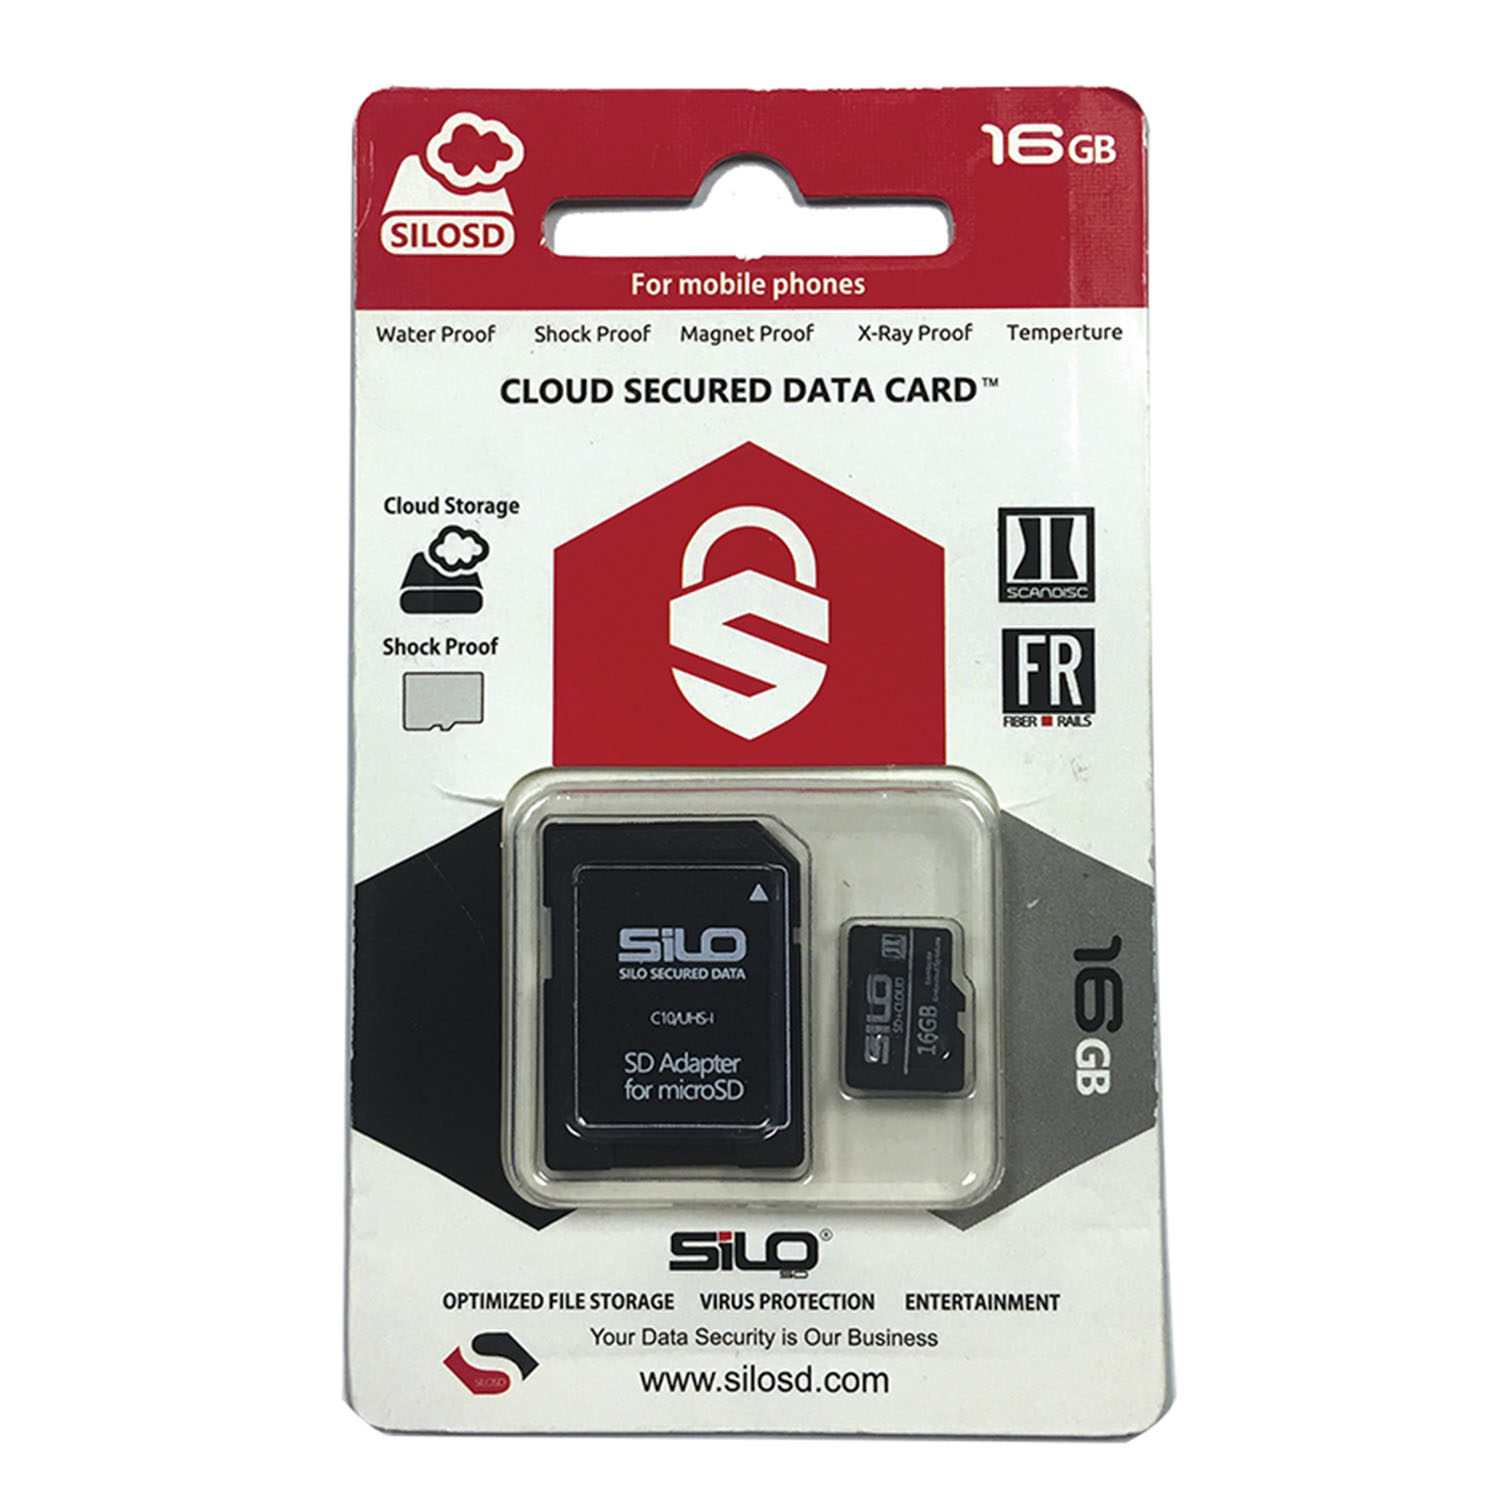 Silo Cloud 16GB SD Card - Our Silo Cloud Sd Cards Are Designed To Extend Your Mobile Phone’s Internal Memory Capacity. Also, It Backs Up Files Through The Silo Cloud So That Your Files Are Never Lost.